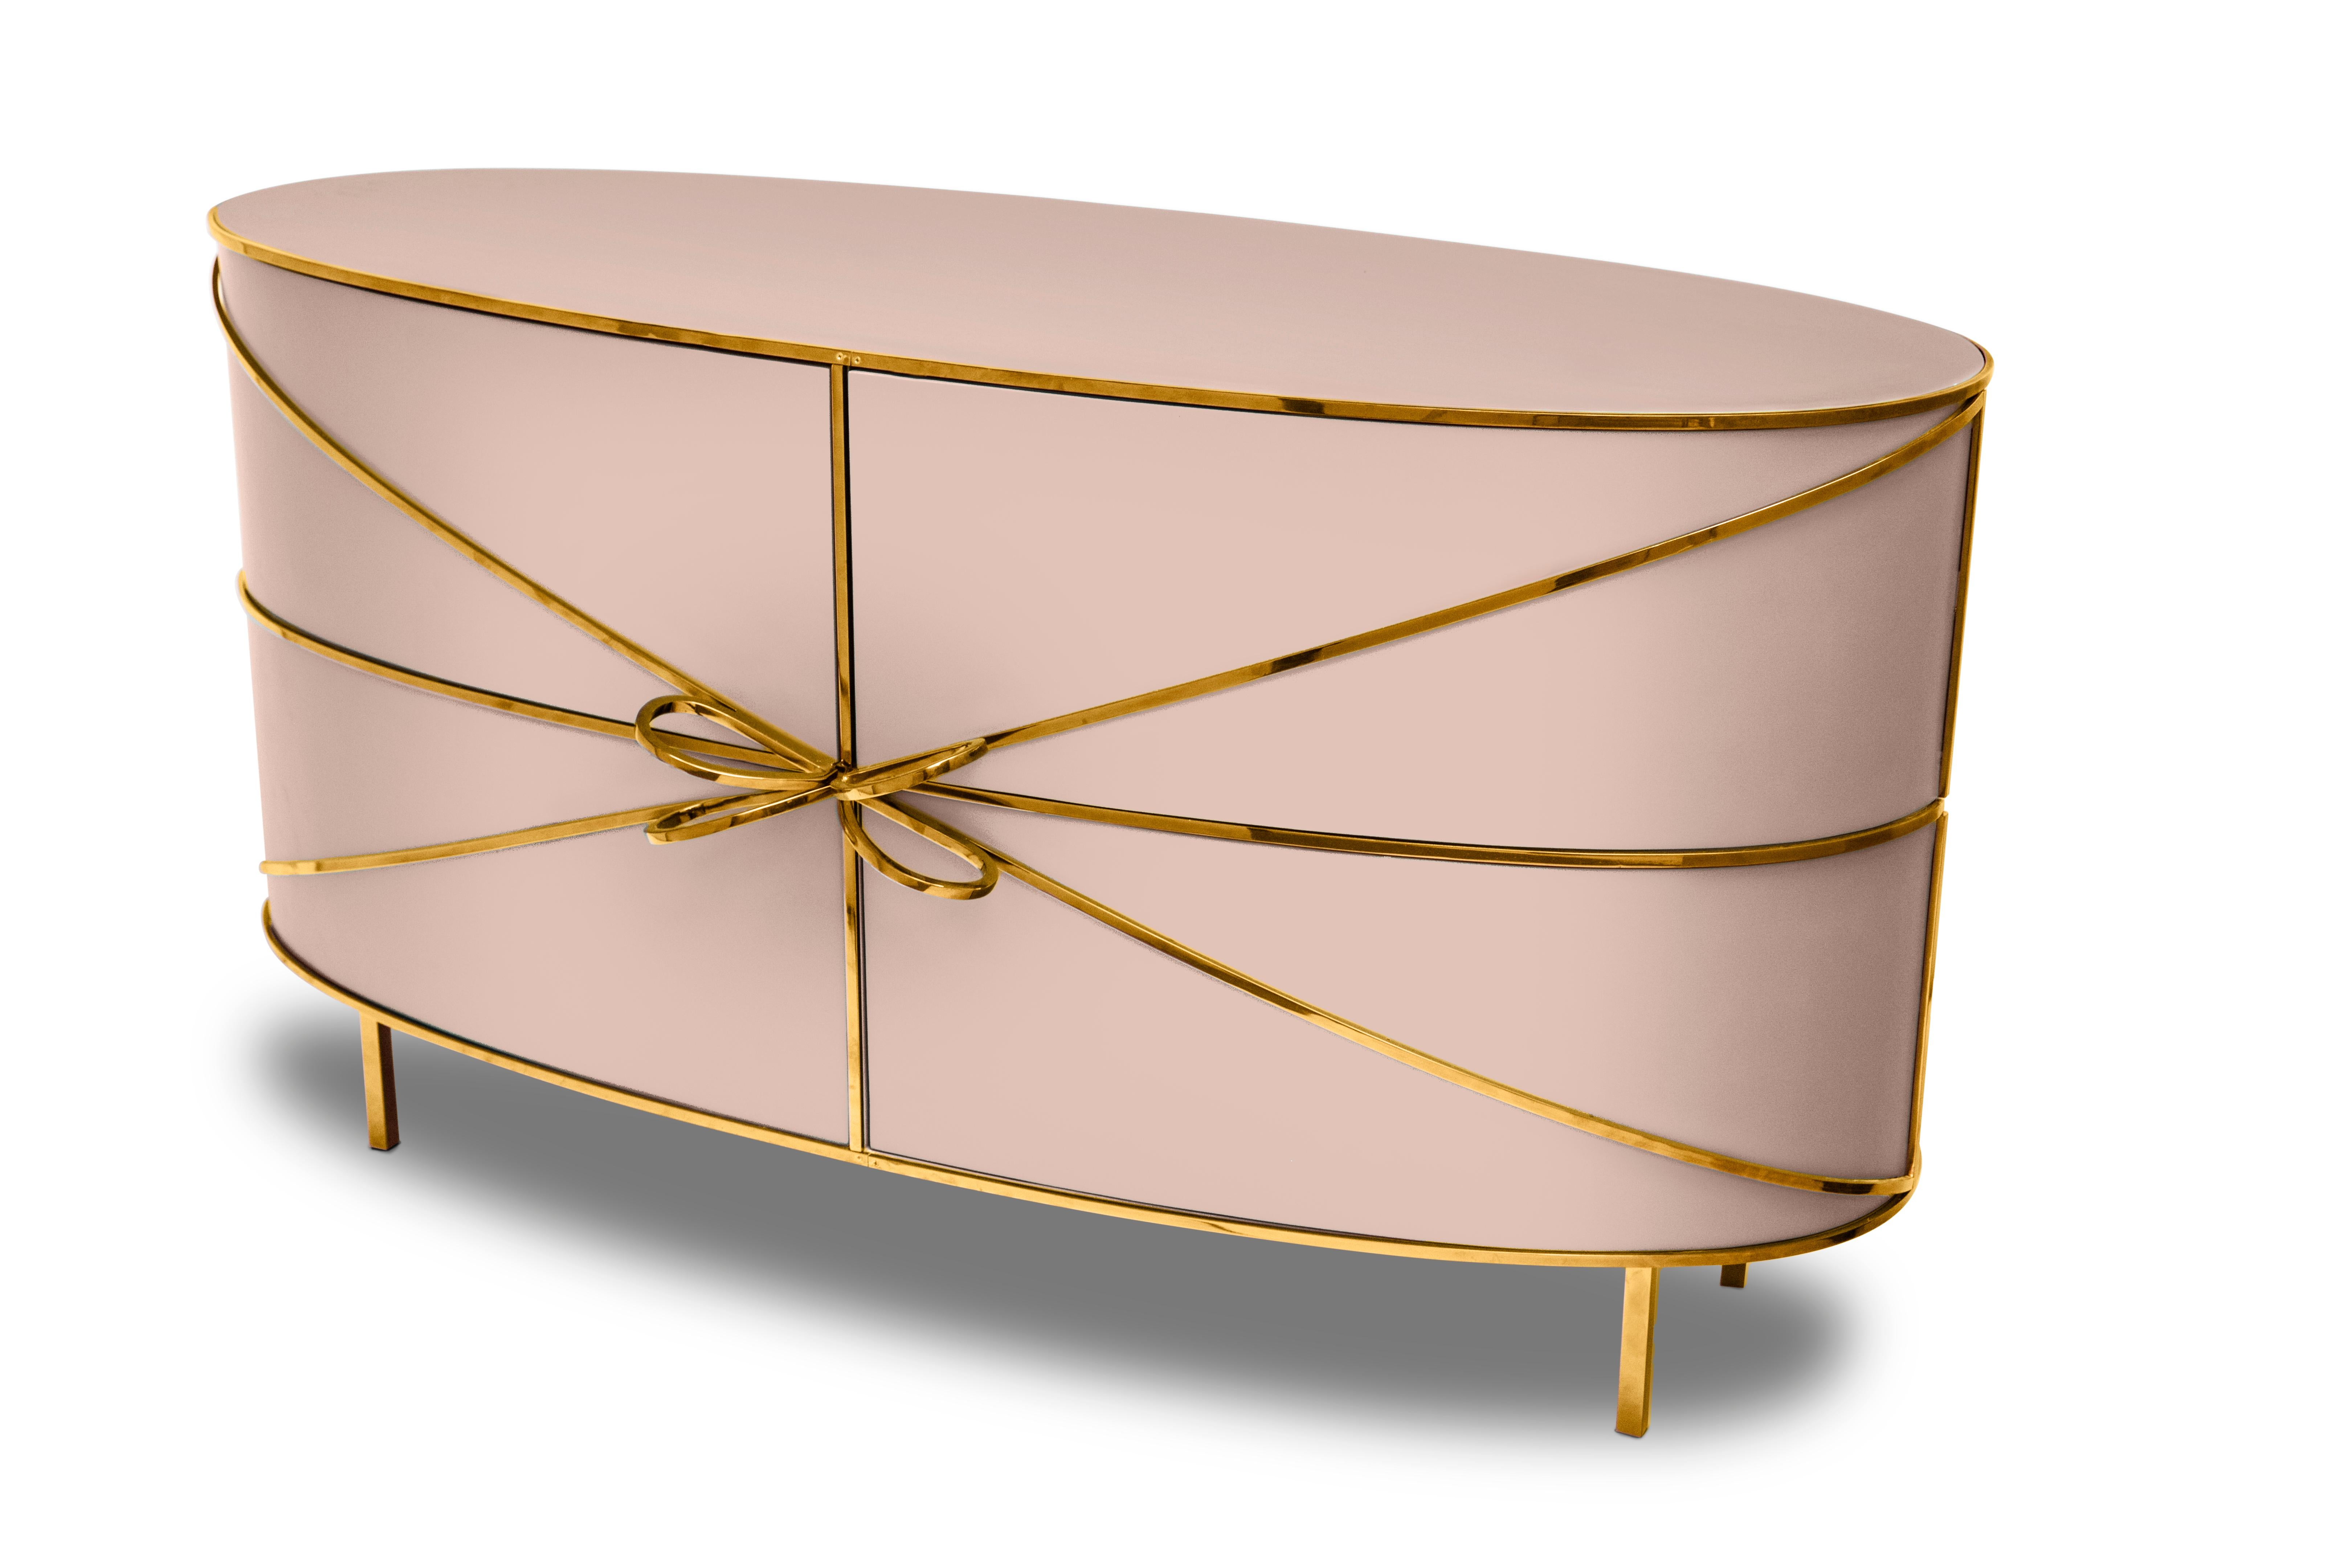 88 Secrets Pink Sideboard with Gold Trims by Nika Zupanc is an elegant pink cabinet in sensuous, feminine lines with luxurious metal trims in gold. A statement piece in any interior space!

Nika Zupanc, a strikingly renowned Slovenian designer,